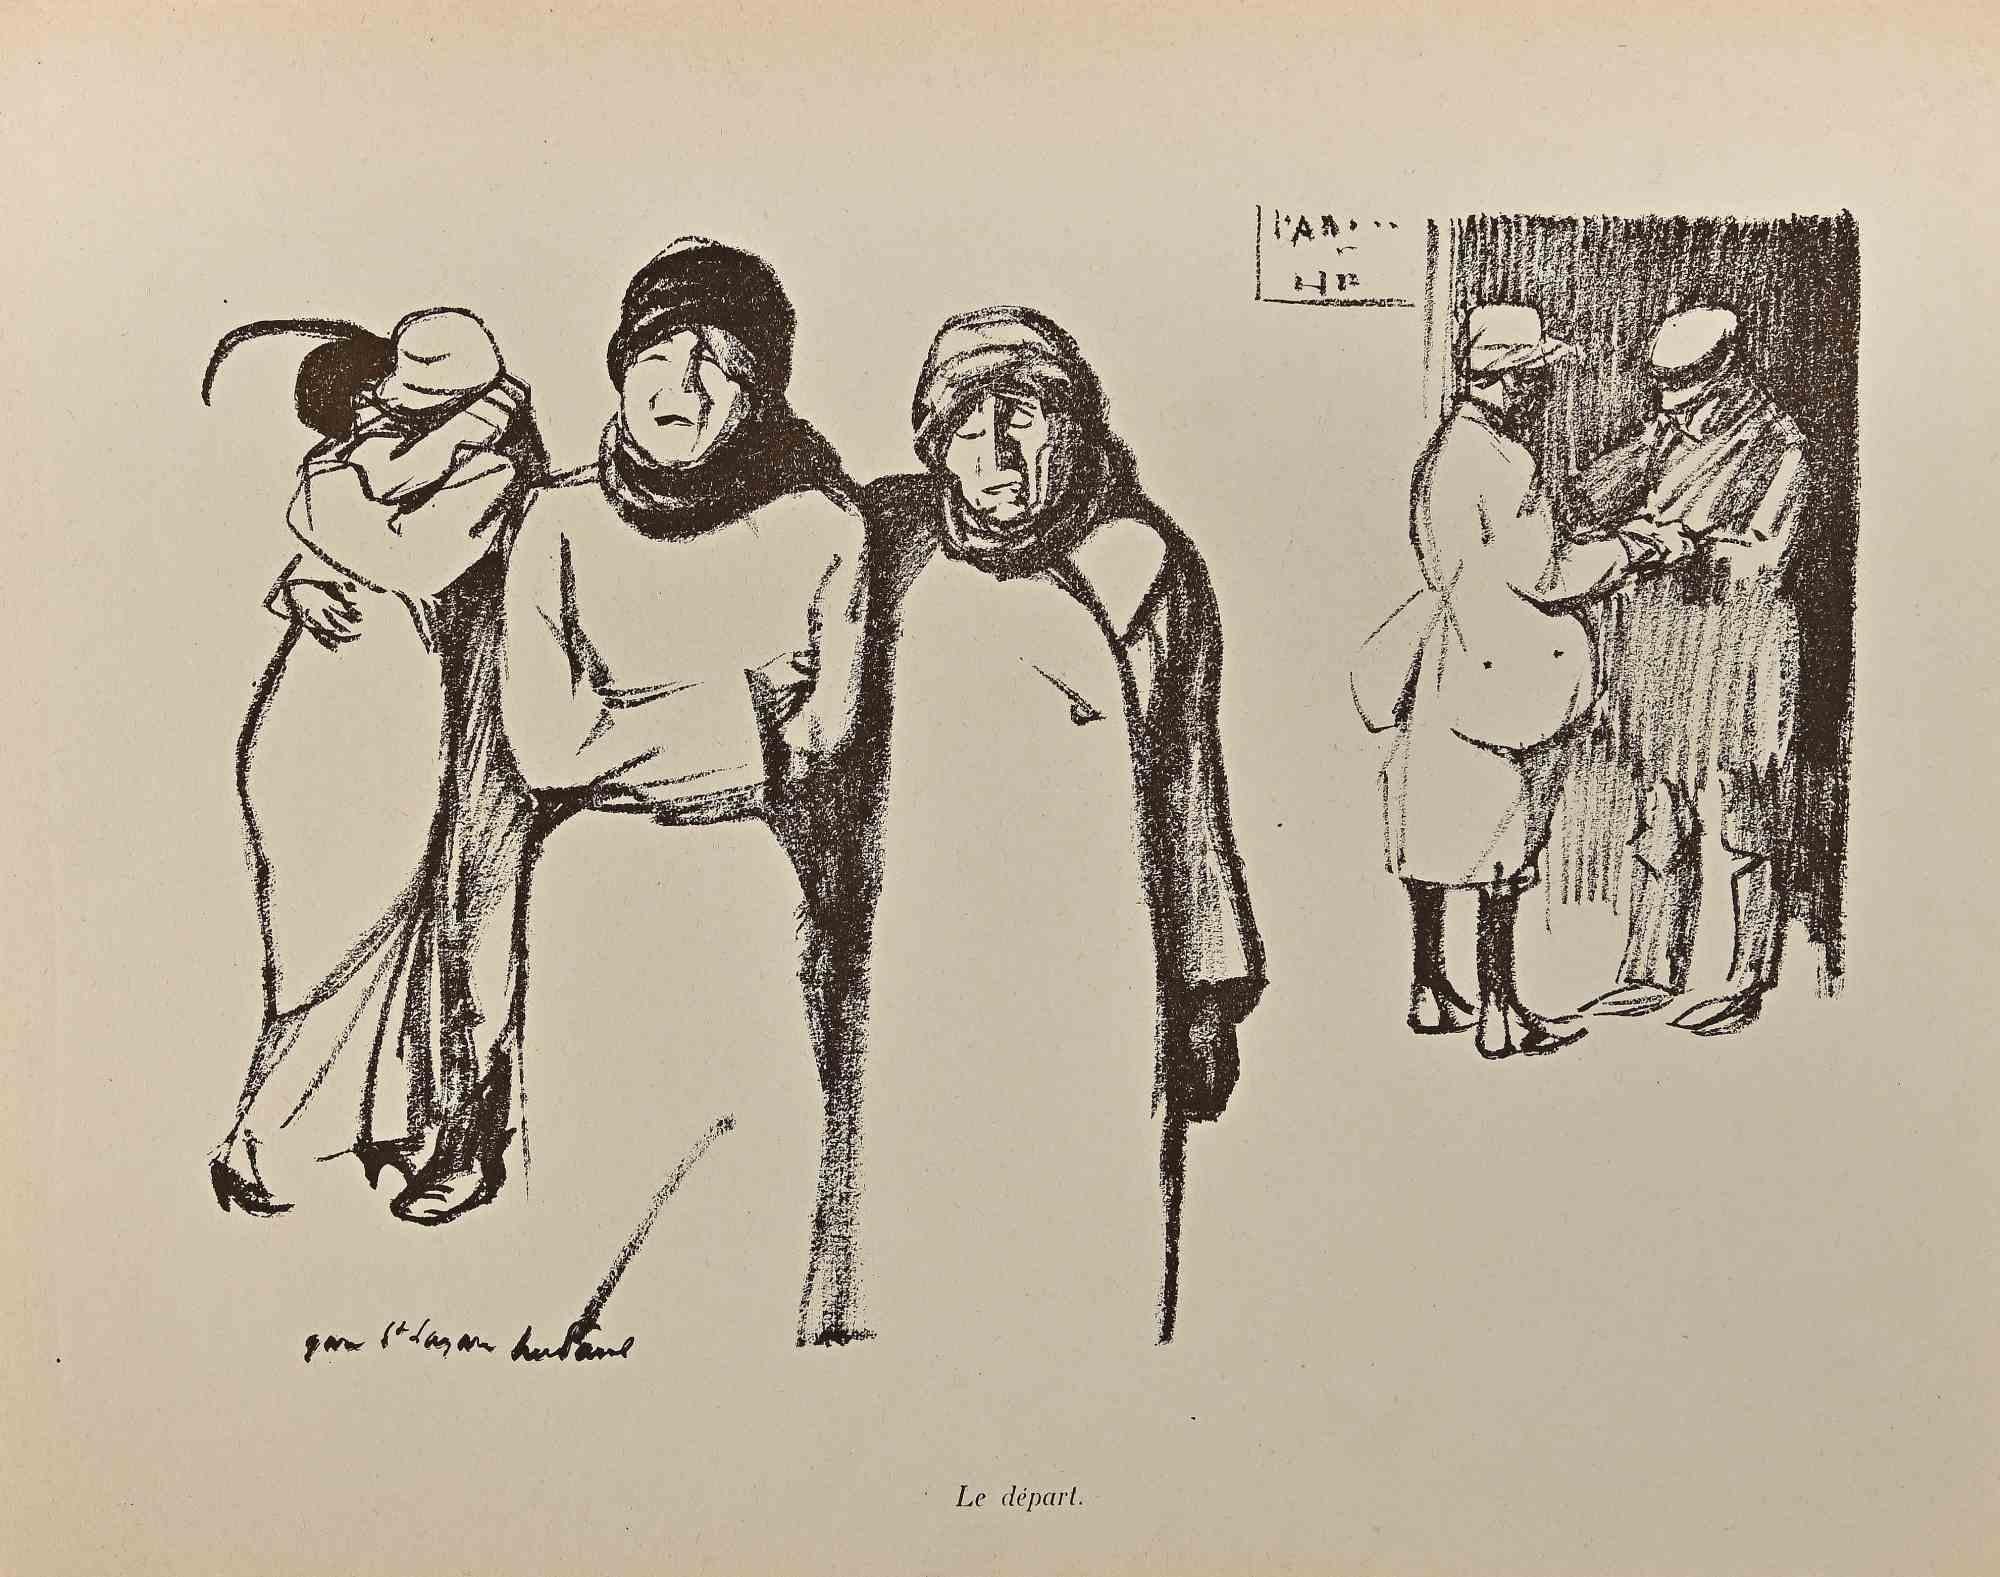 Le Départ is an Original Lithograph realized by Hermann Paul from the series "La Grande Guerre Par Les Artistes"

Good condition on a yellowed cardboard.

Signed and titled on the lower margin, number 4 of fourth collection.

René Georges